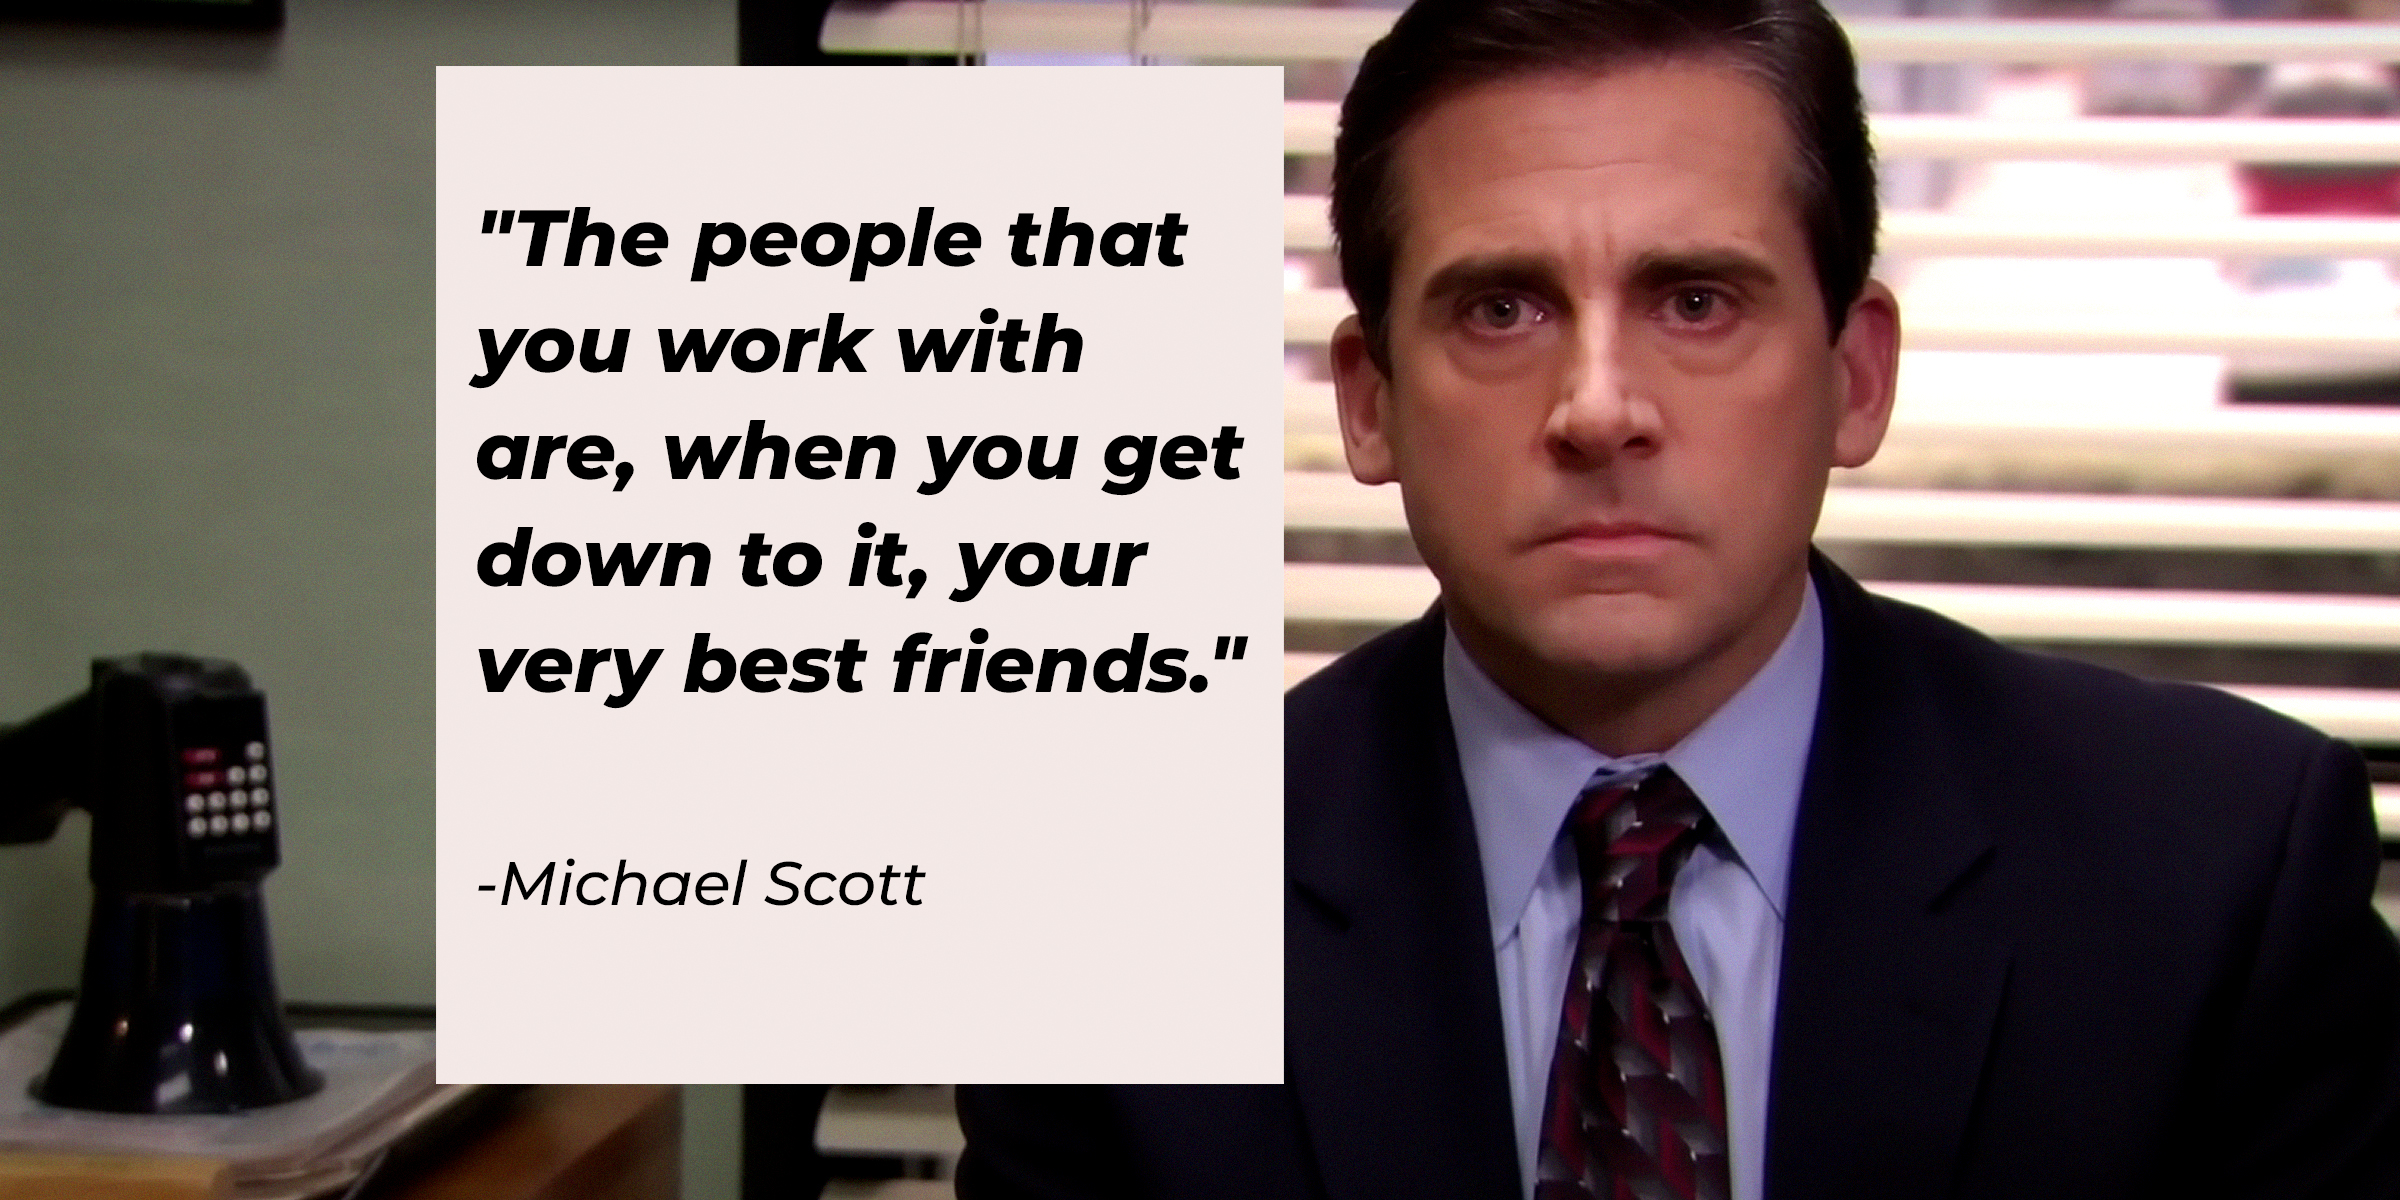 Michael Scott's quote: "The people that you work with are, when you get down to it, your very best friends" | Source: Youtube.com/TheOffice